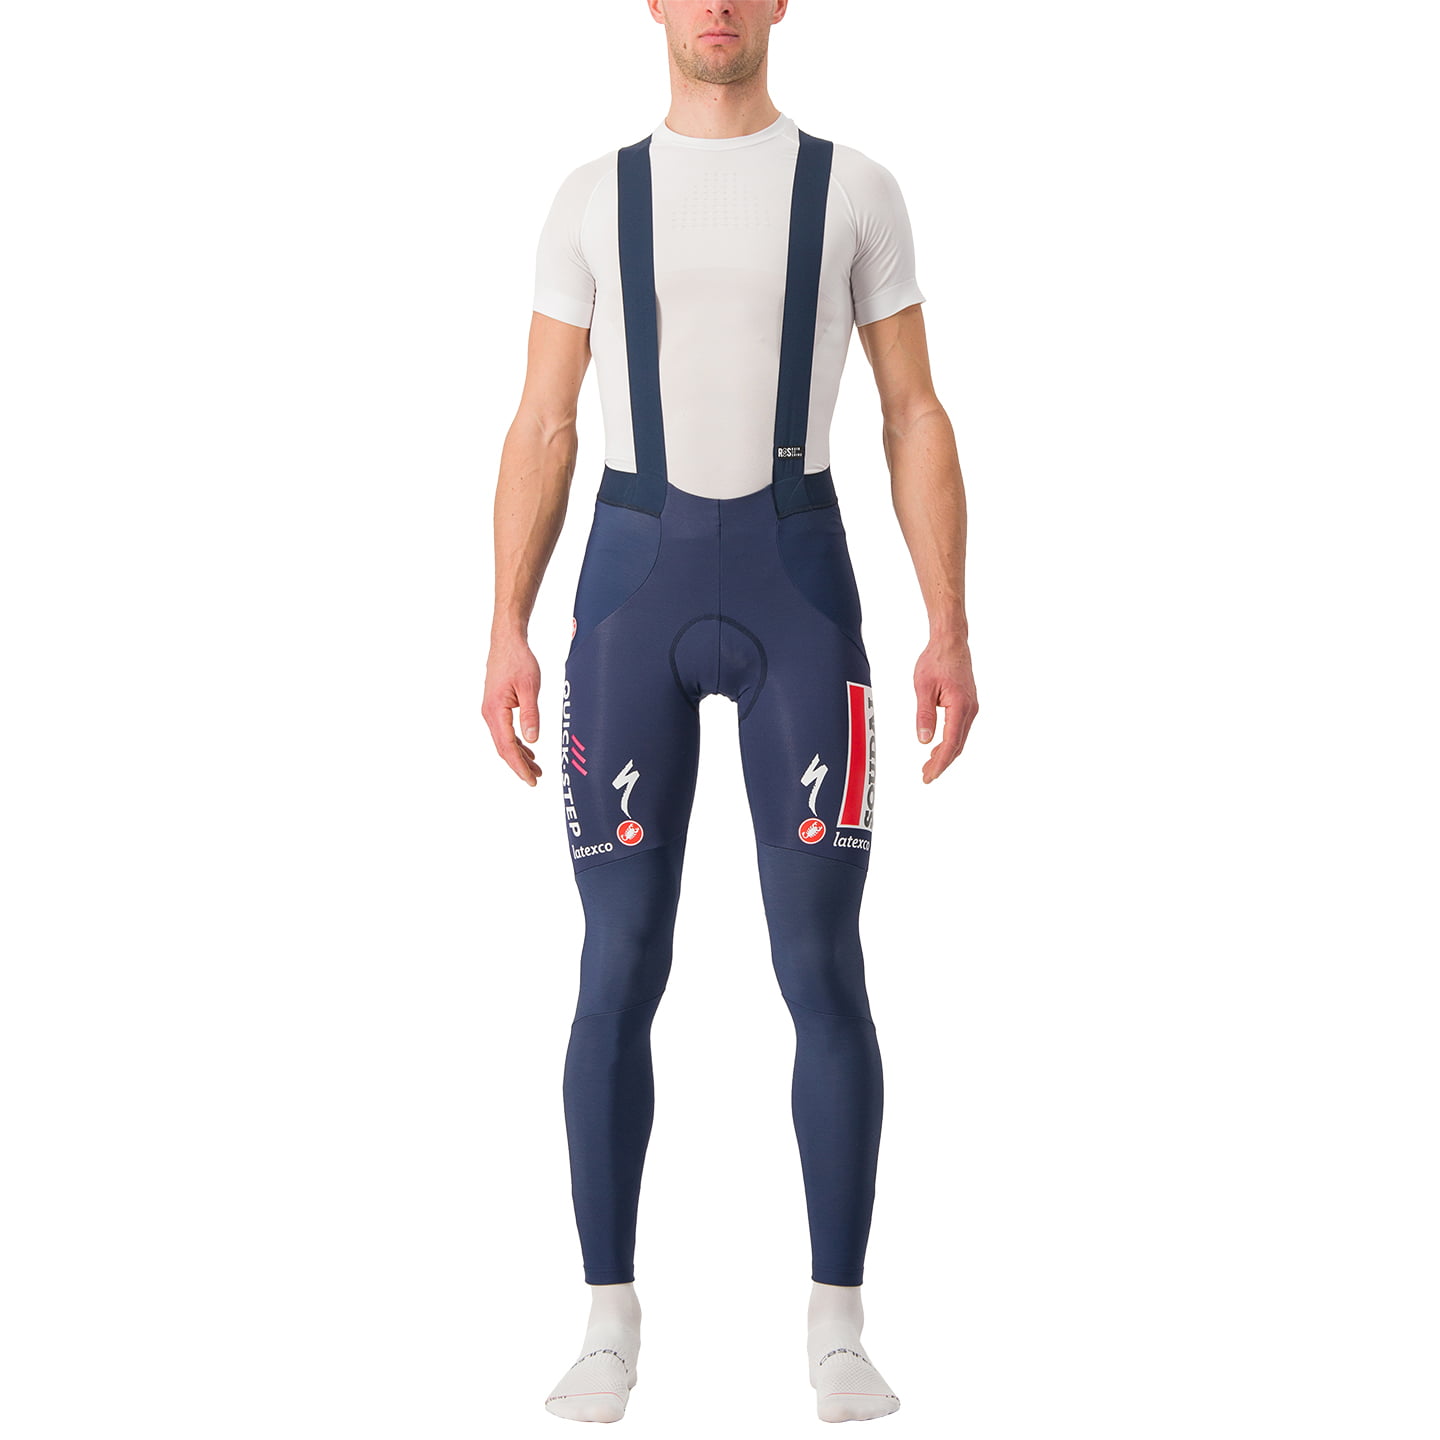 SOUDAL QUICK-STEP 2023 Bib Tights, for men, size 2XL, Cycle trousers, Cycle gear